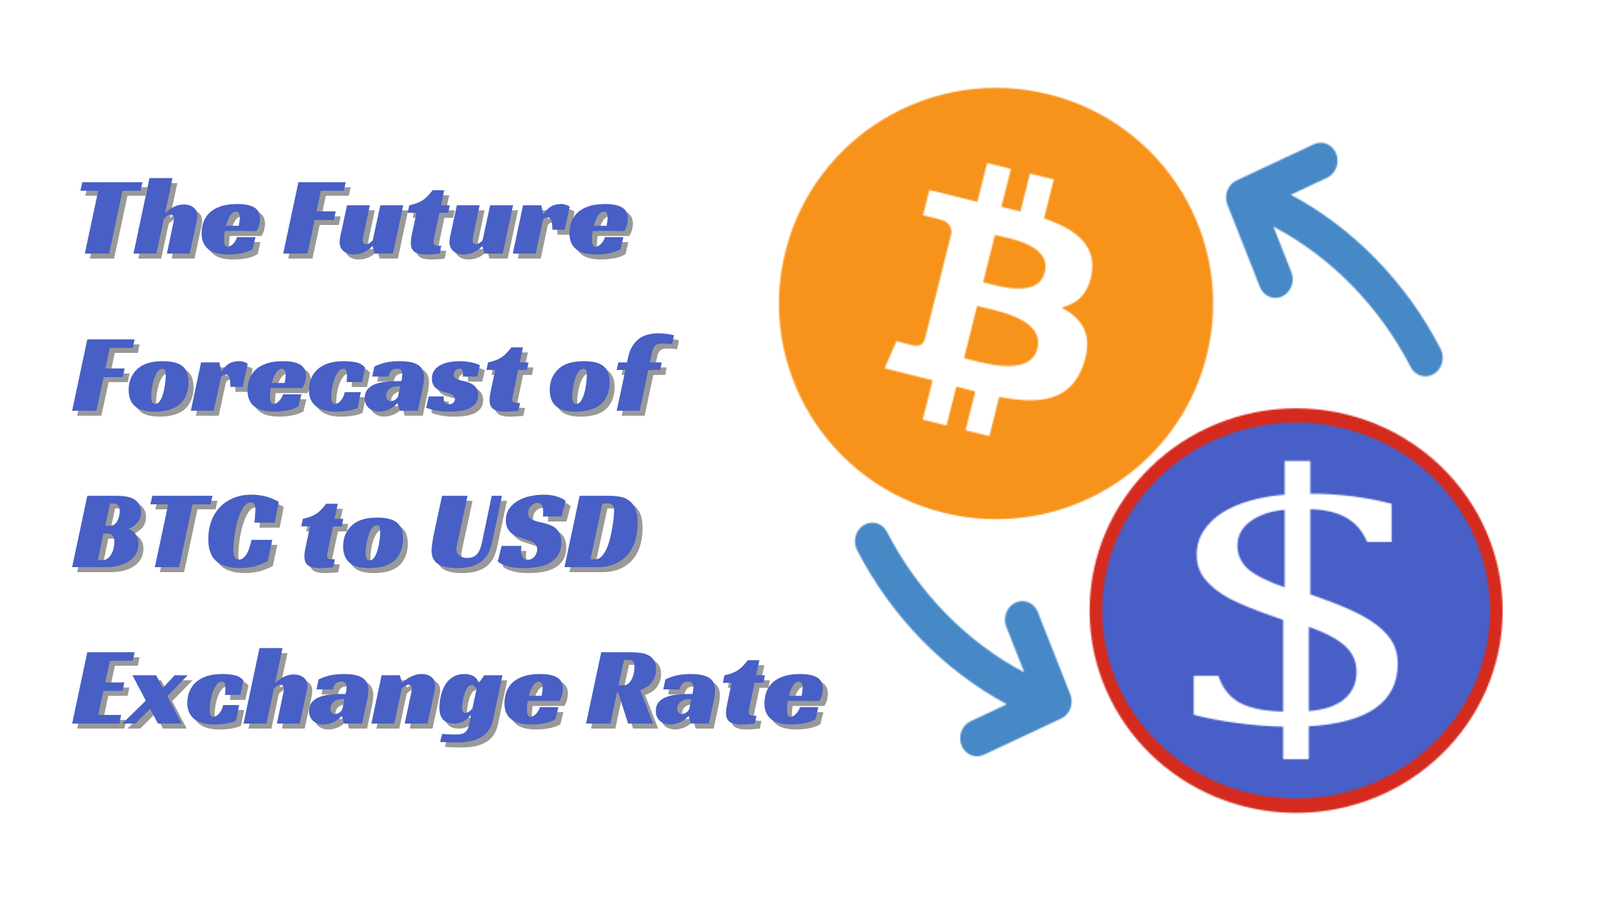 The Future Forecast of BTC to USD Exchange Rate